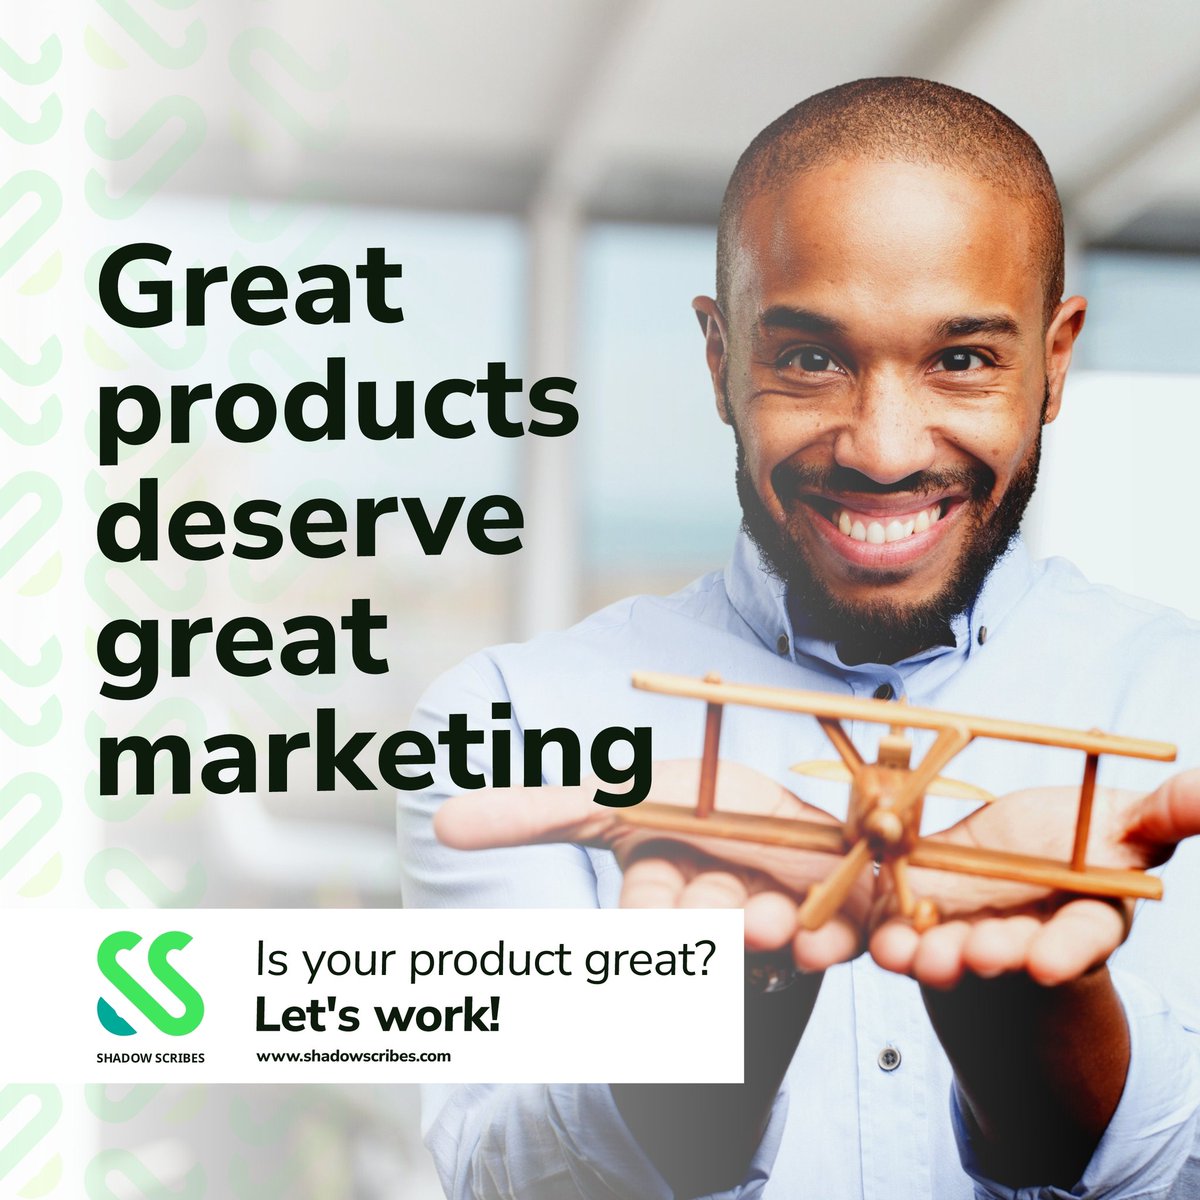 Your product may be revolutionary and have the power to transform lives but may also lack reach. This is where Shadow Scribes comes in.

We have the marketing expertise to take your product to its intended audience; driving sales and visibility levels you can only dream of.